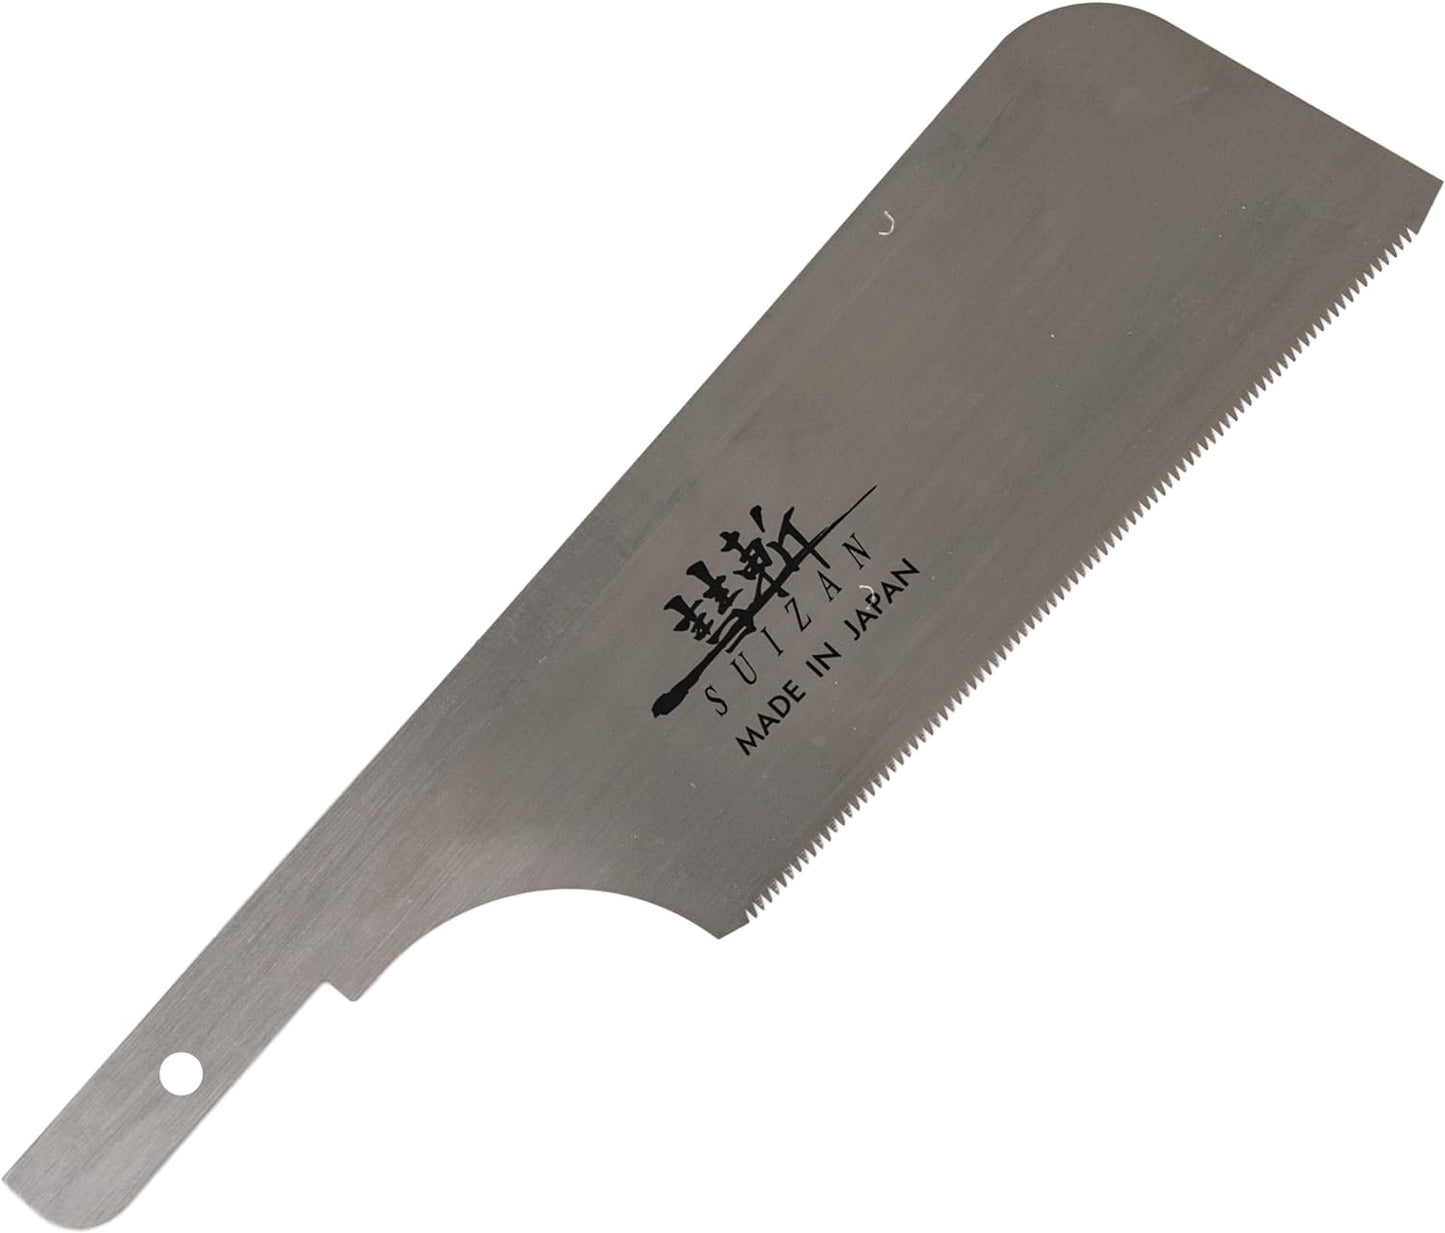 SUIZAN Replacement Blade for Japanese Saw 6 Inch Dozuki (Dovetail) for Cross-cut, Rip-cut and Angle Cut